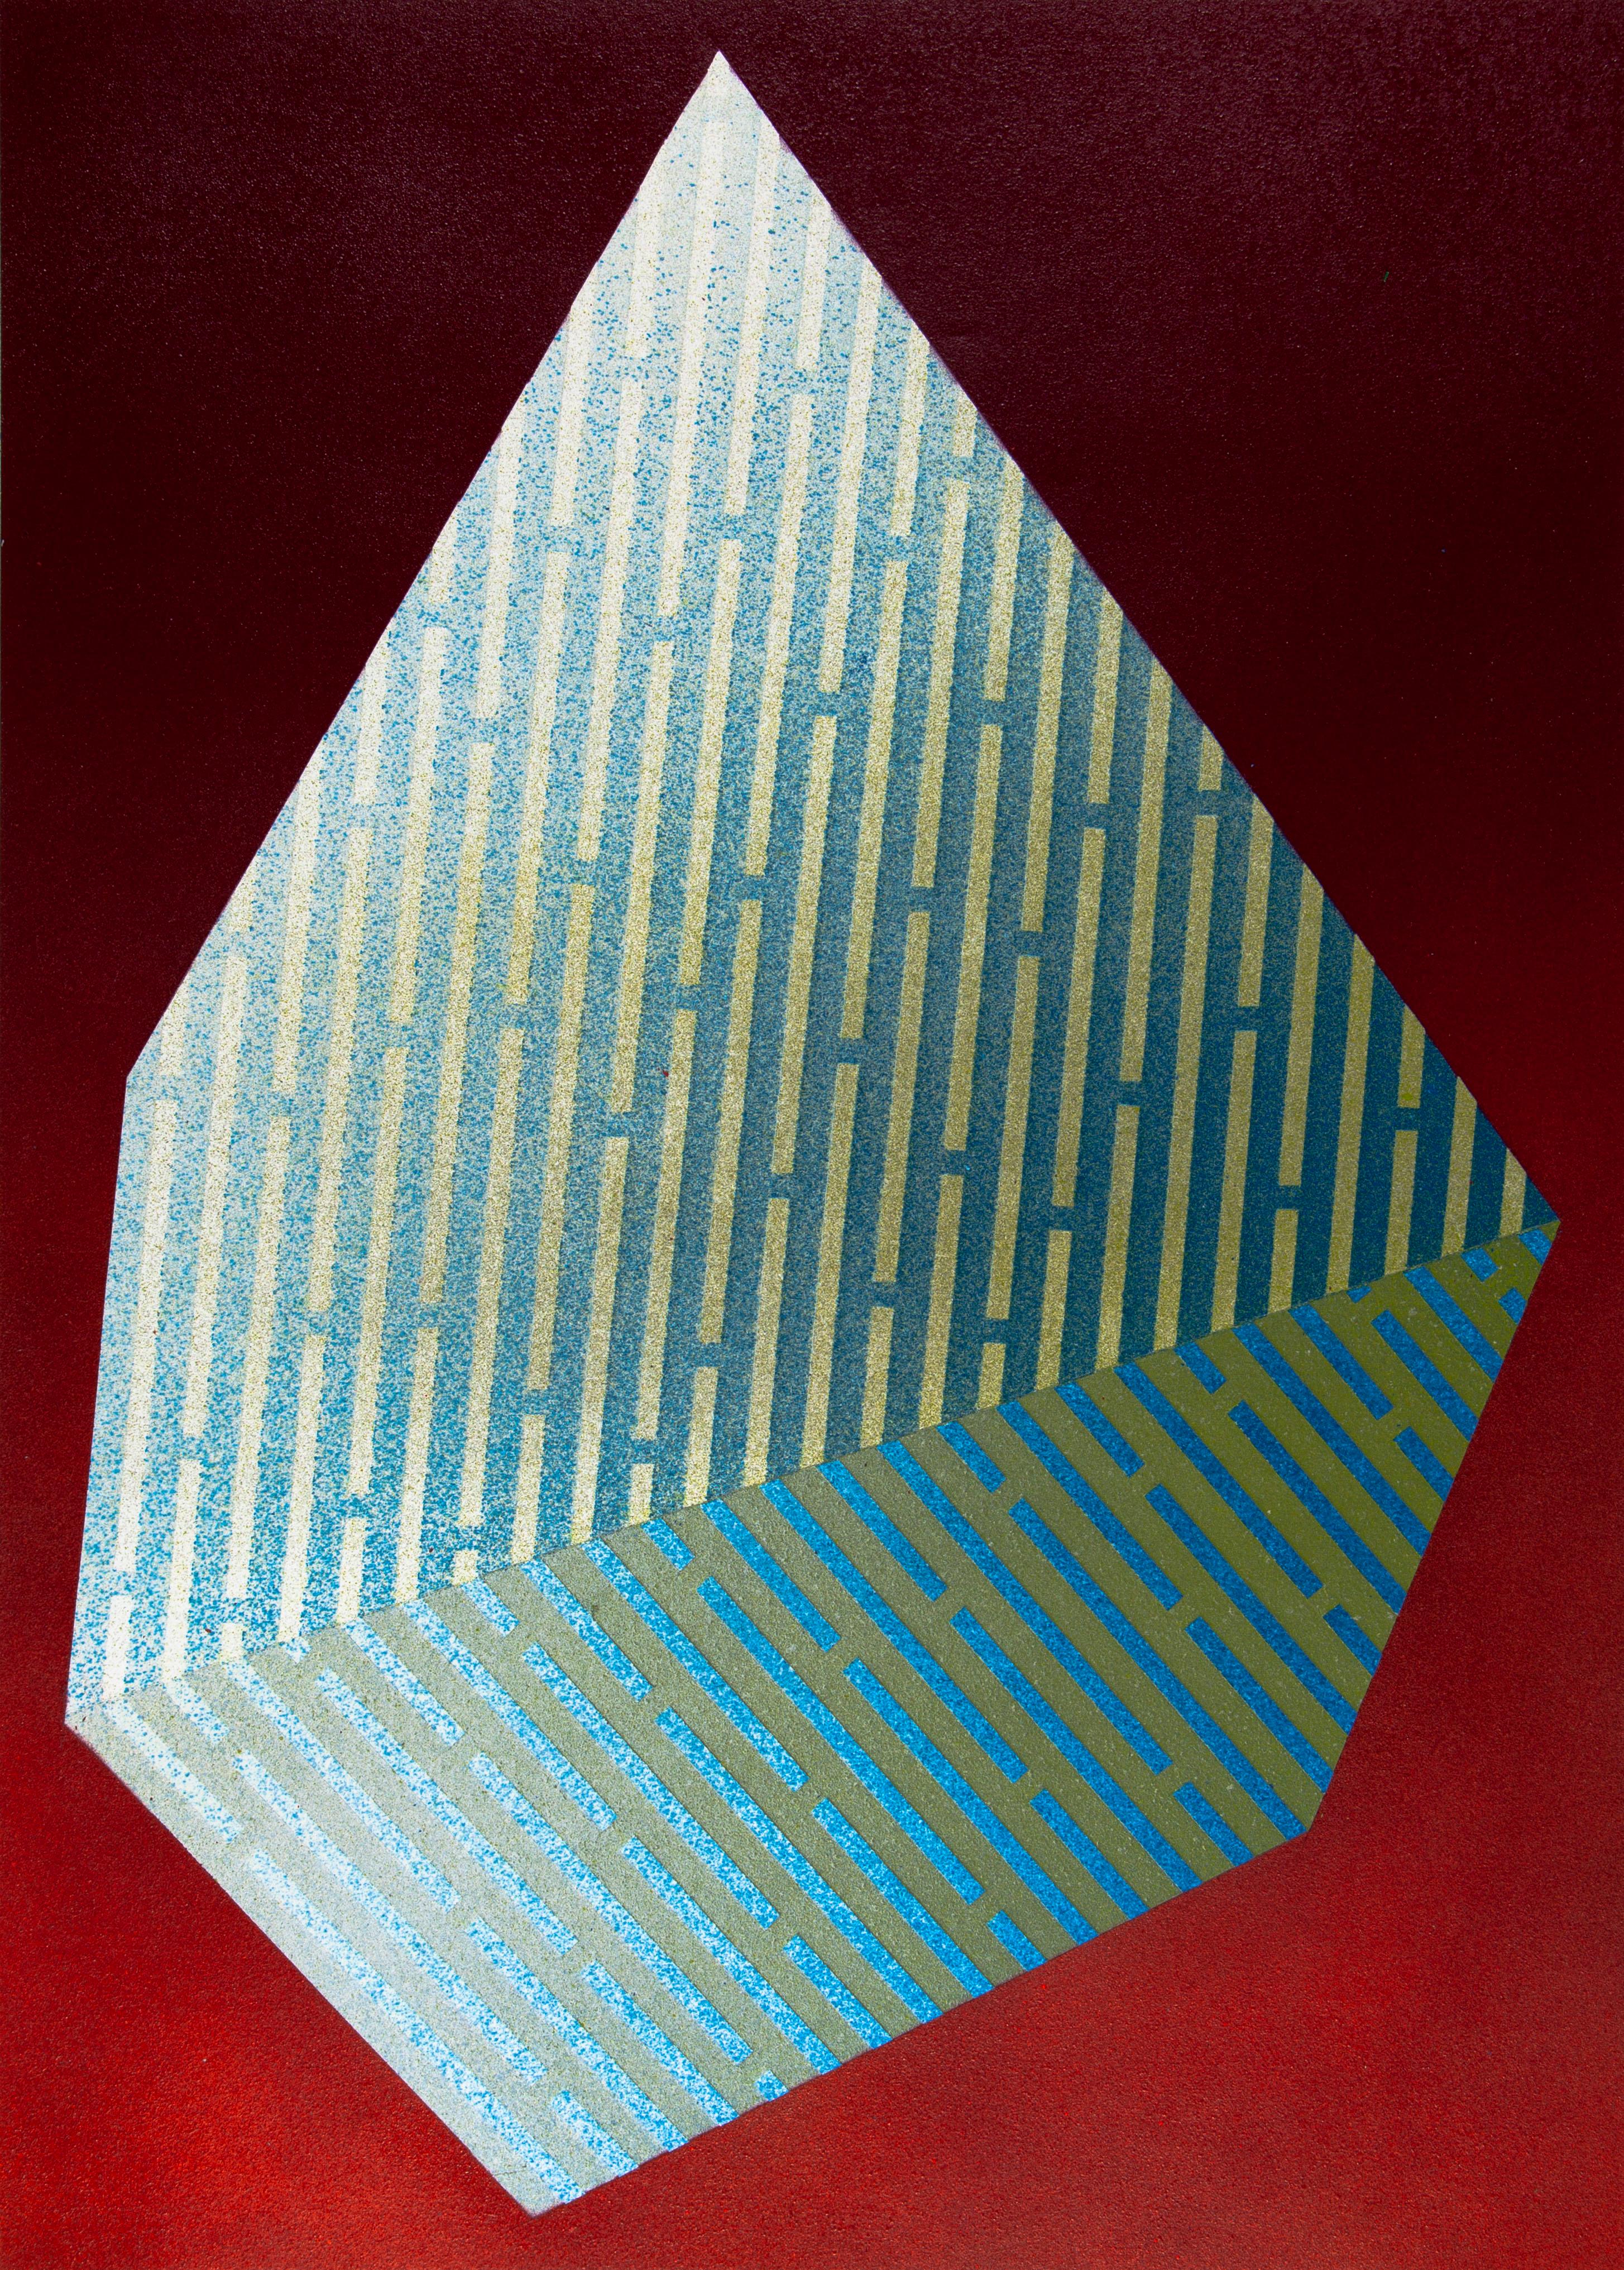 Jay Walker Figurative Painting - Luminescent Polygon XIV: geometric abstract painting; red & blue line patterns